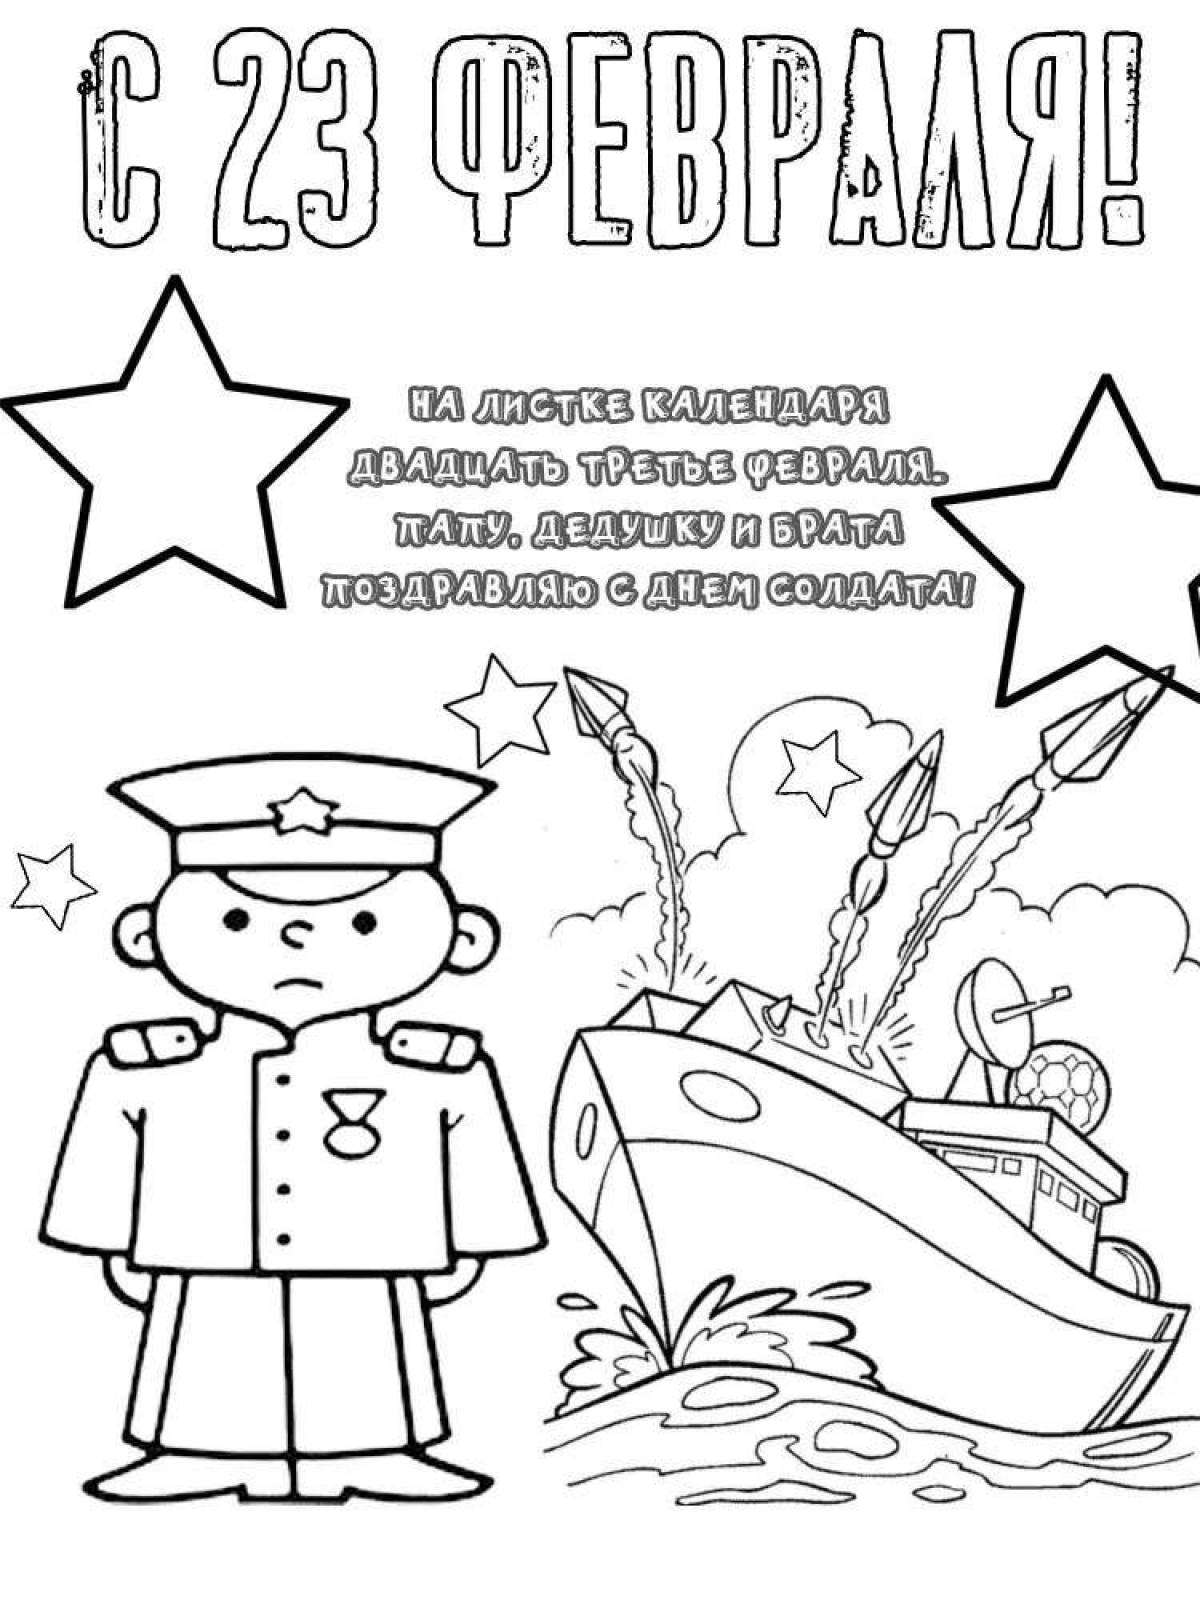 Coloring page sunny February 23